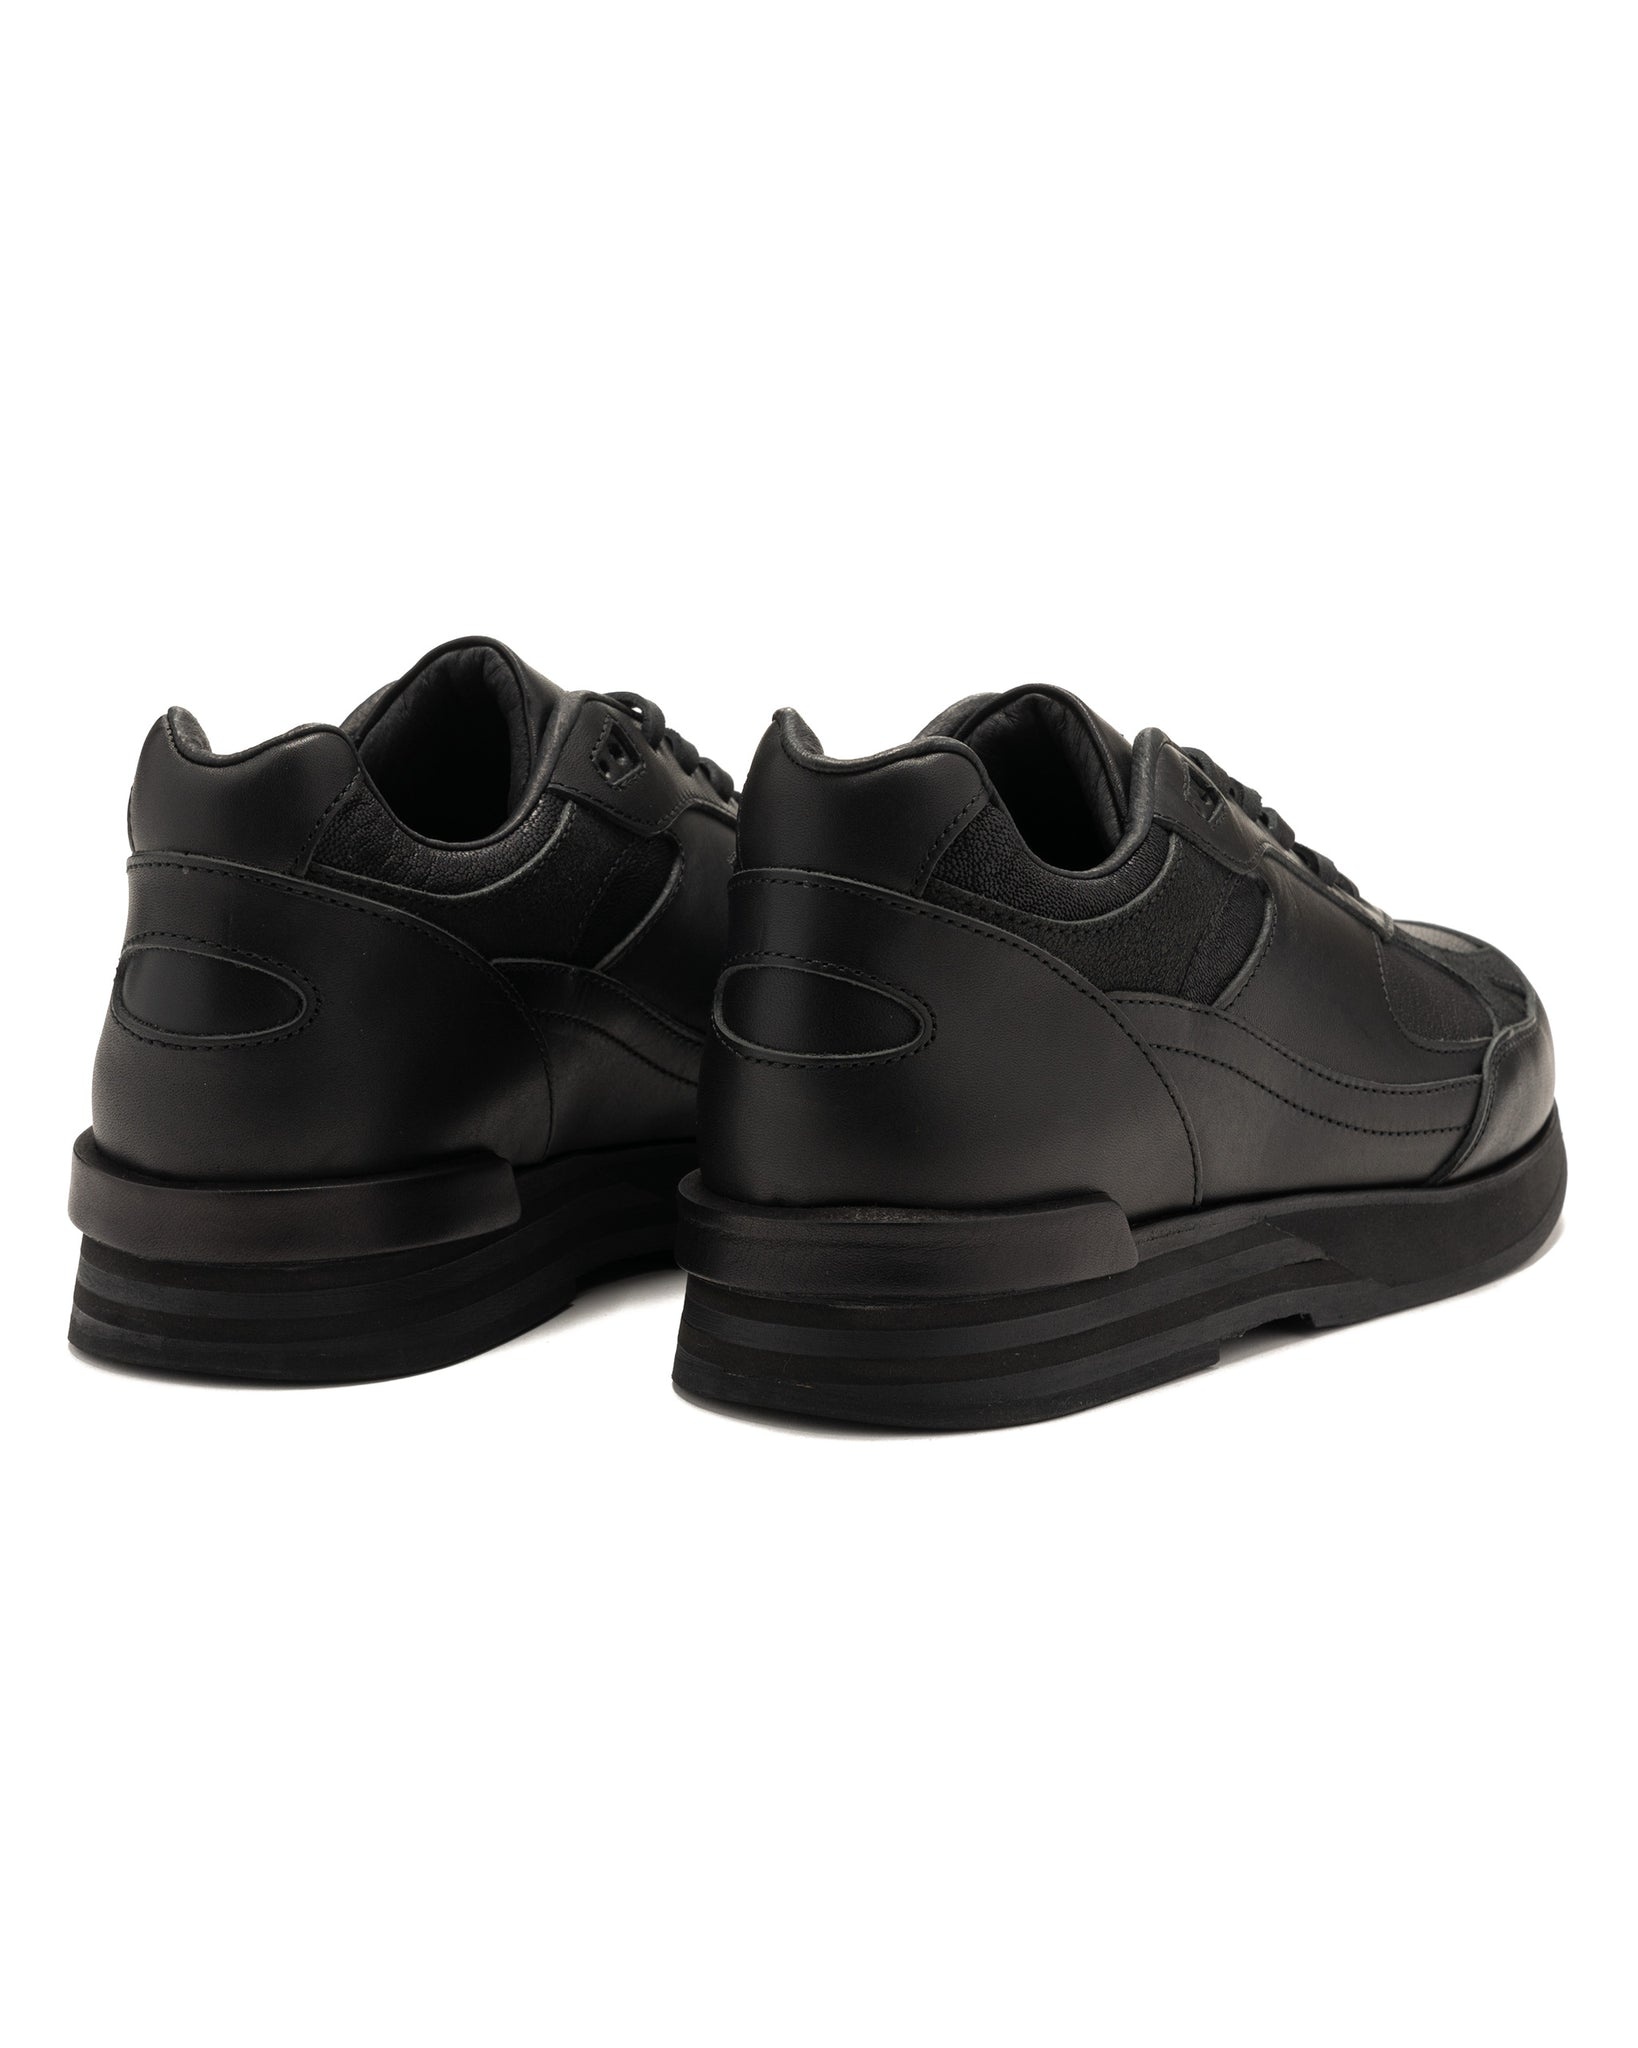 Manual Industrial Products 28 Shoes Black - 3